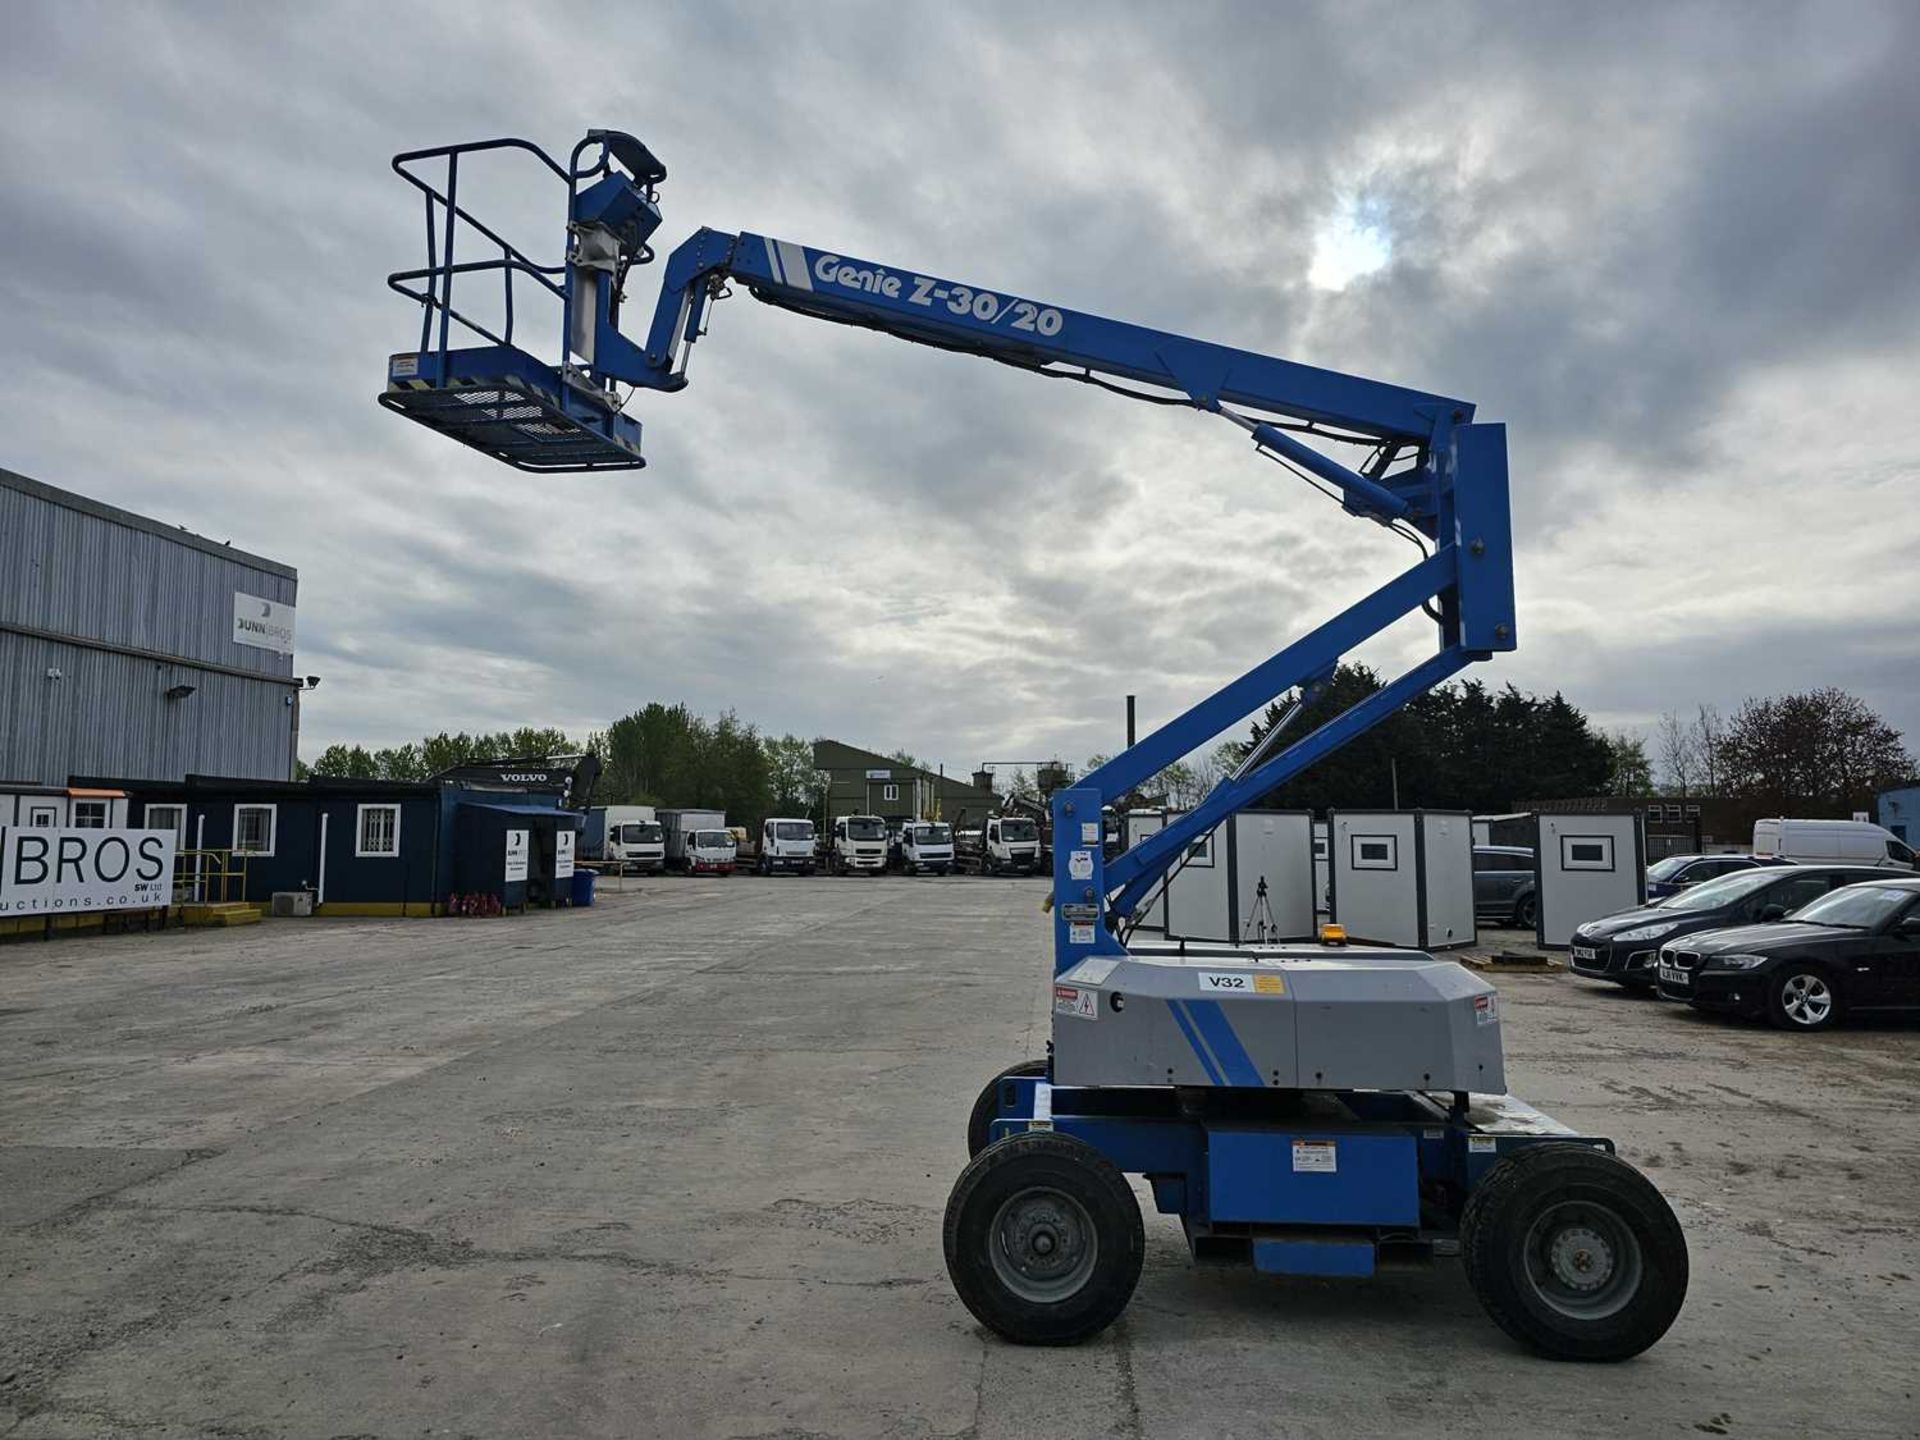 Genie Z30/20HD Wheeled Articulated Electric Scissor Lift Access Platform - Image 2 of 17